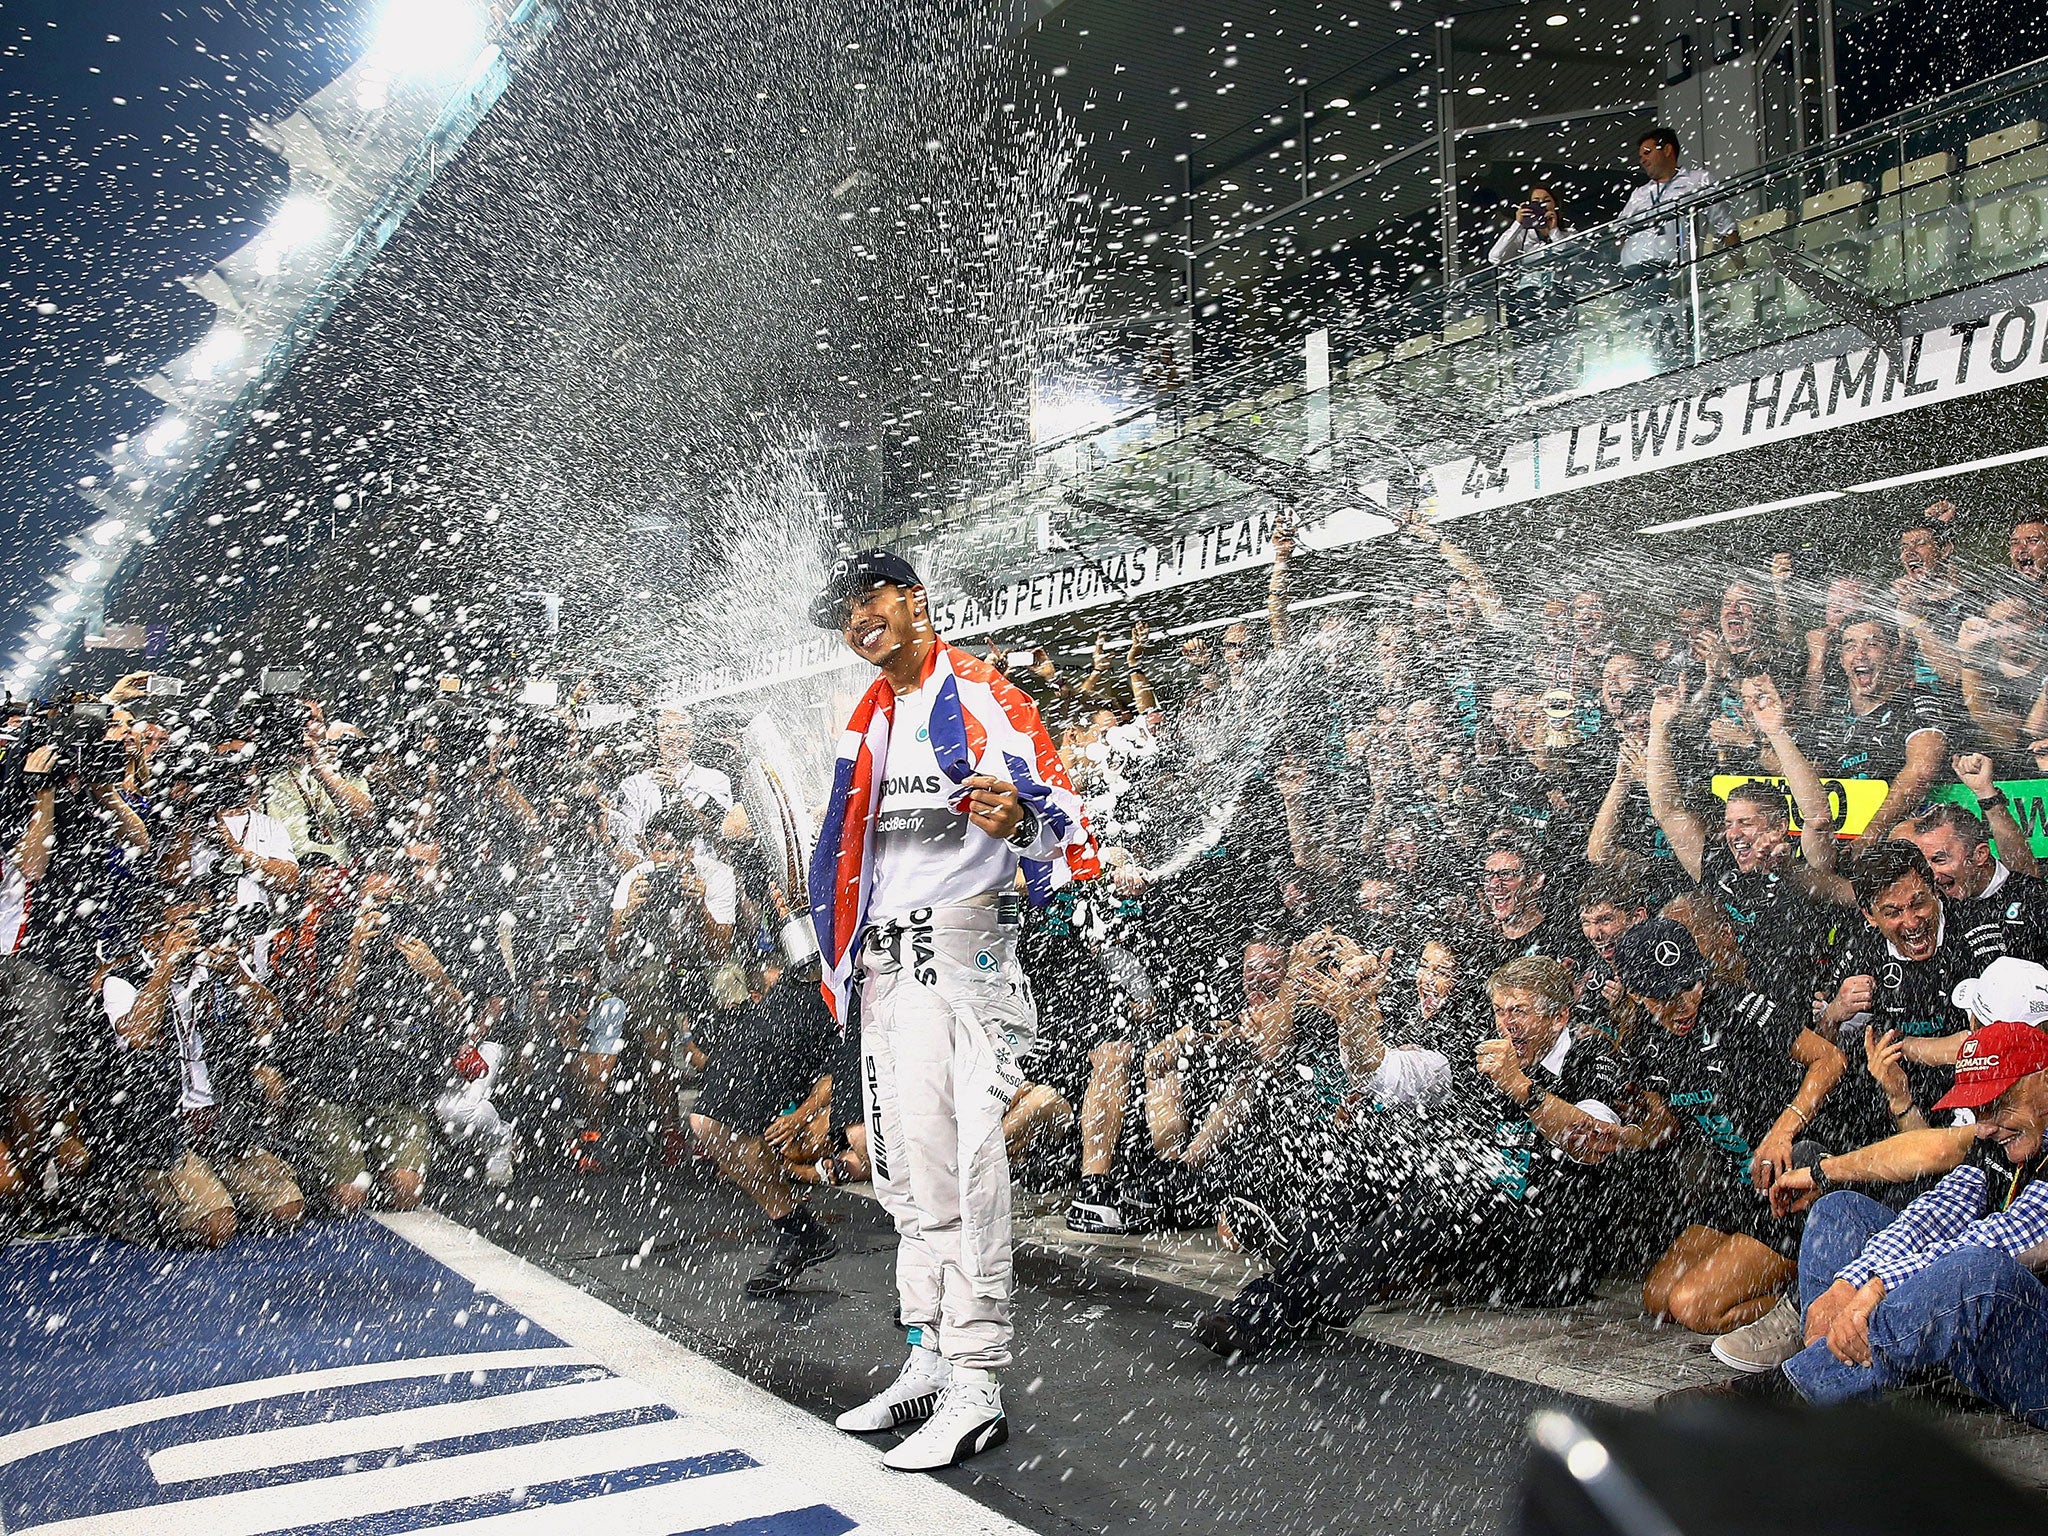 Lewis Hamilton is showered with champagne after the race